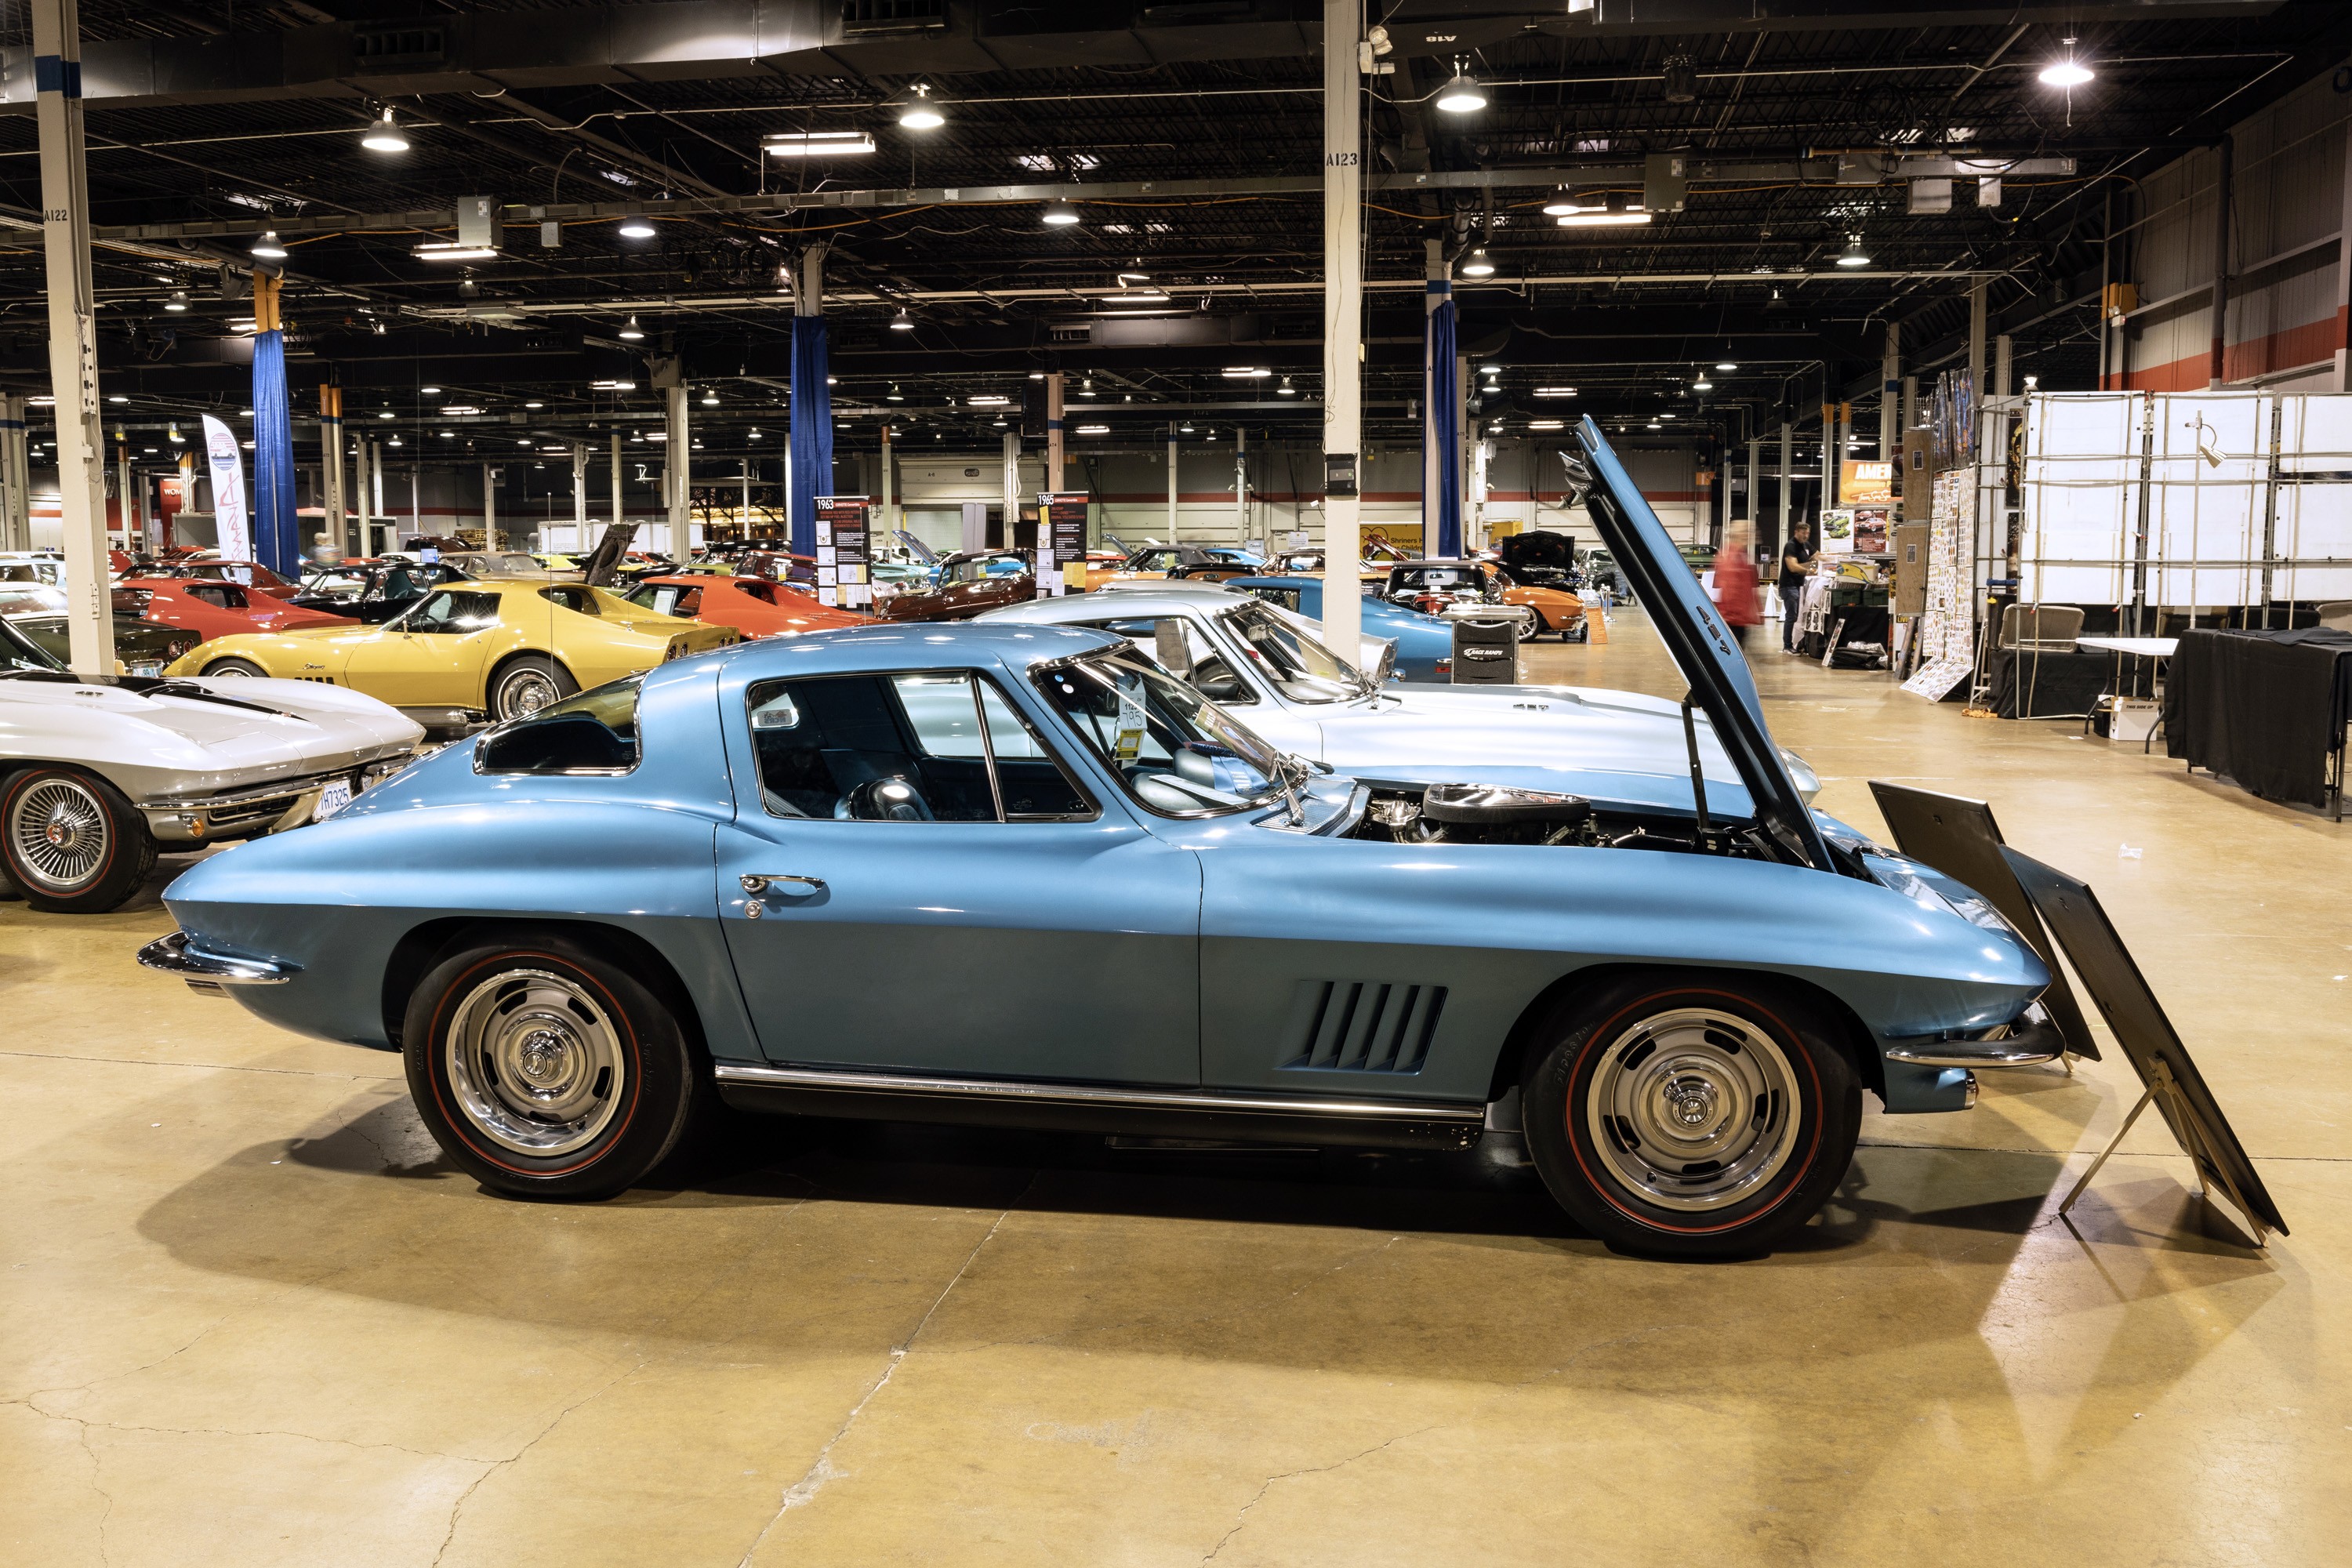 These Two Unrestored Corvettes are Absolute Time Capsules